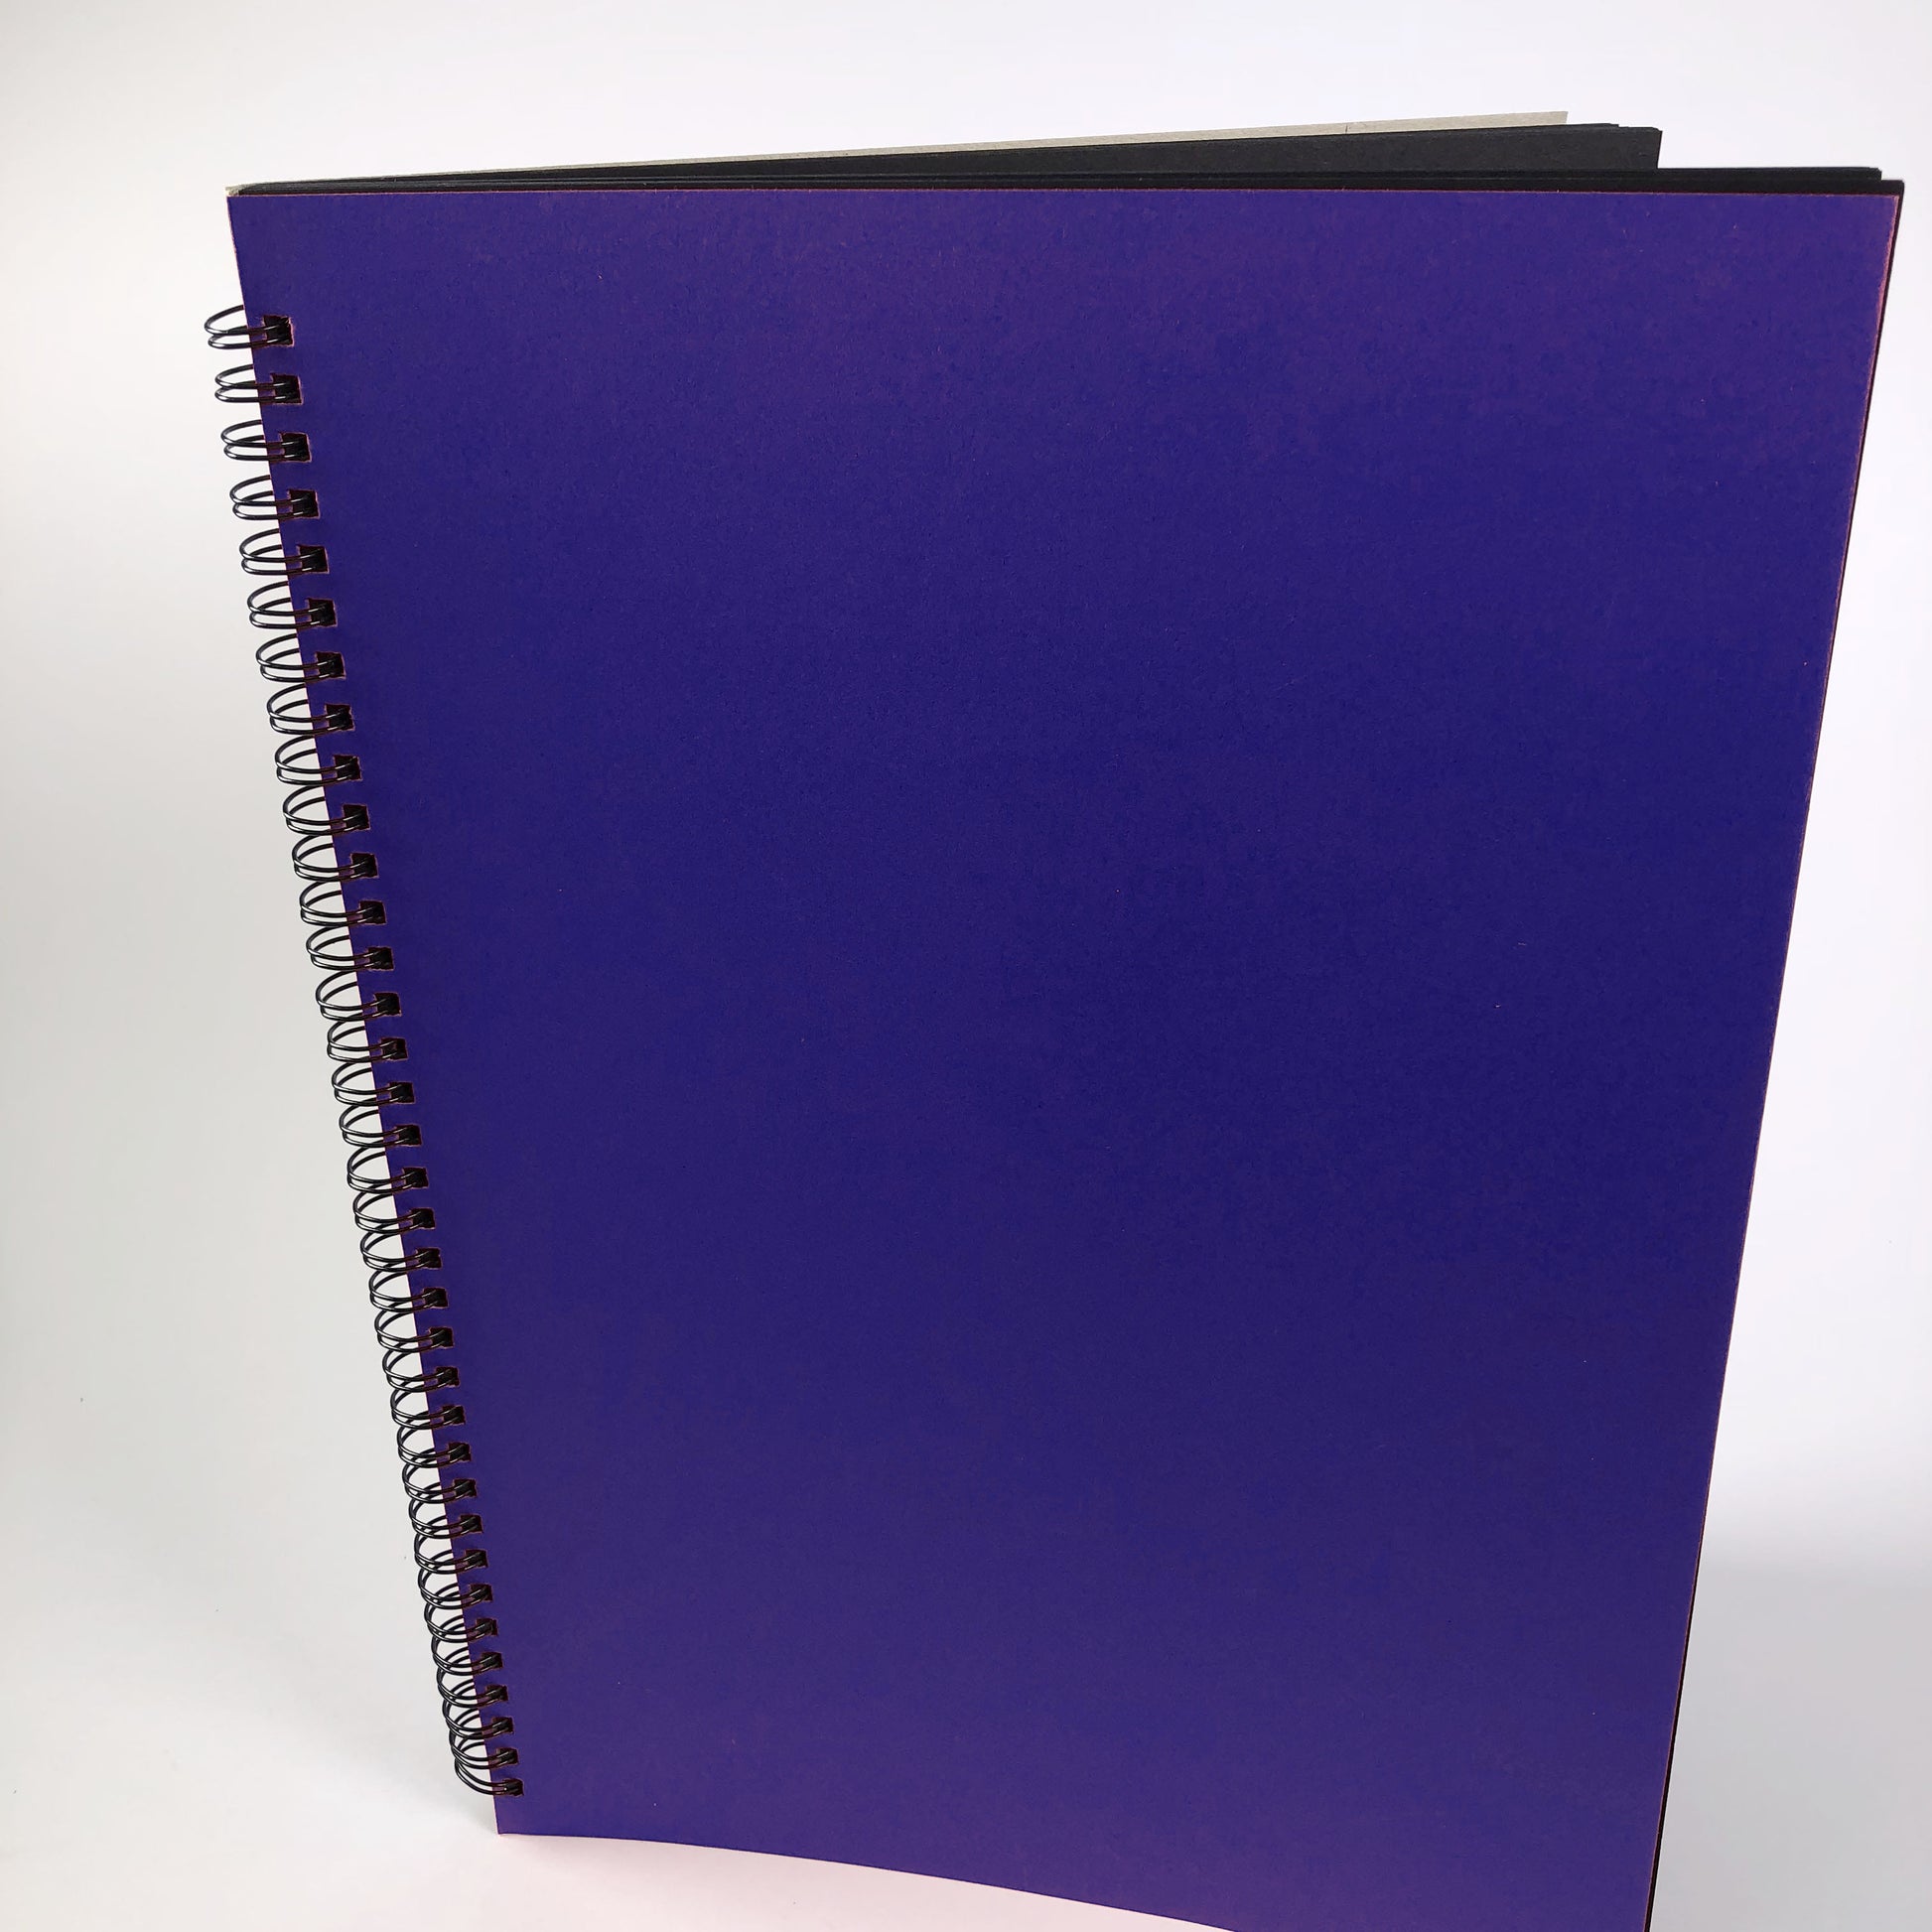 Blue cover work book